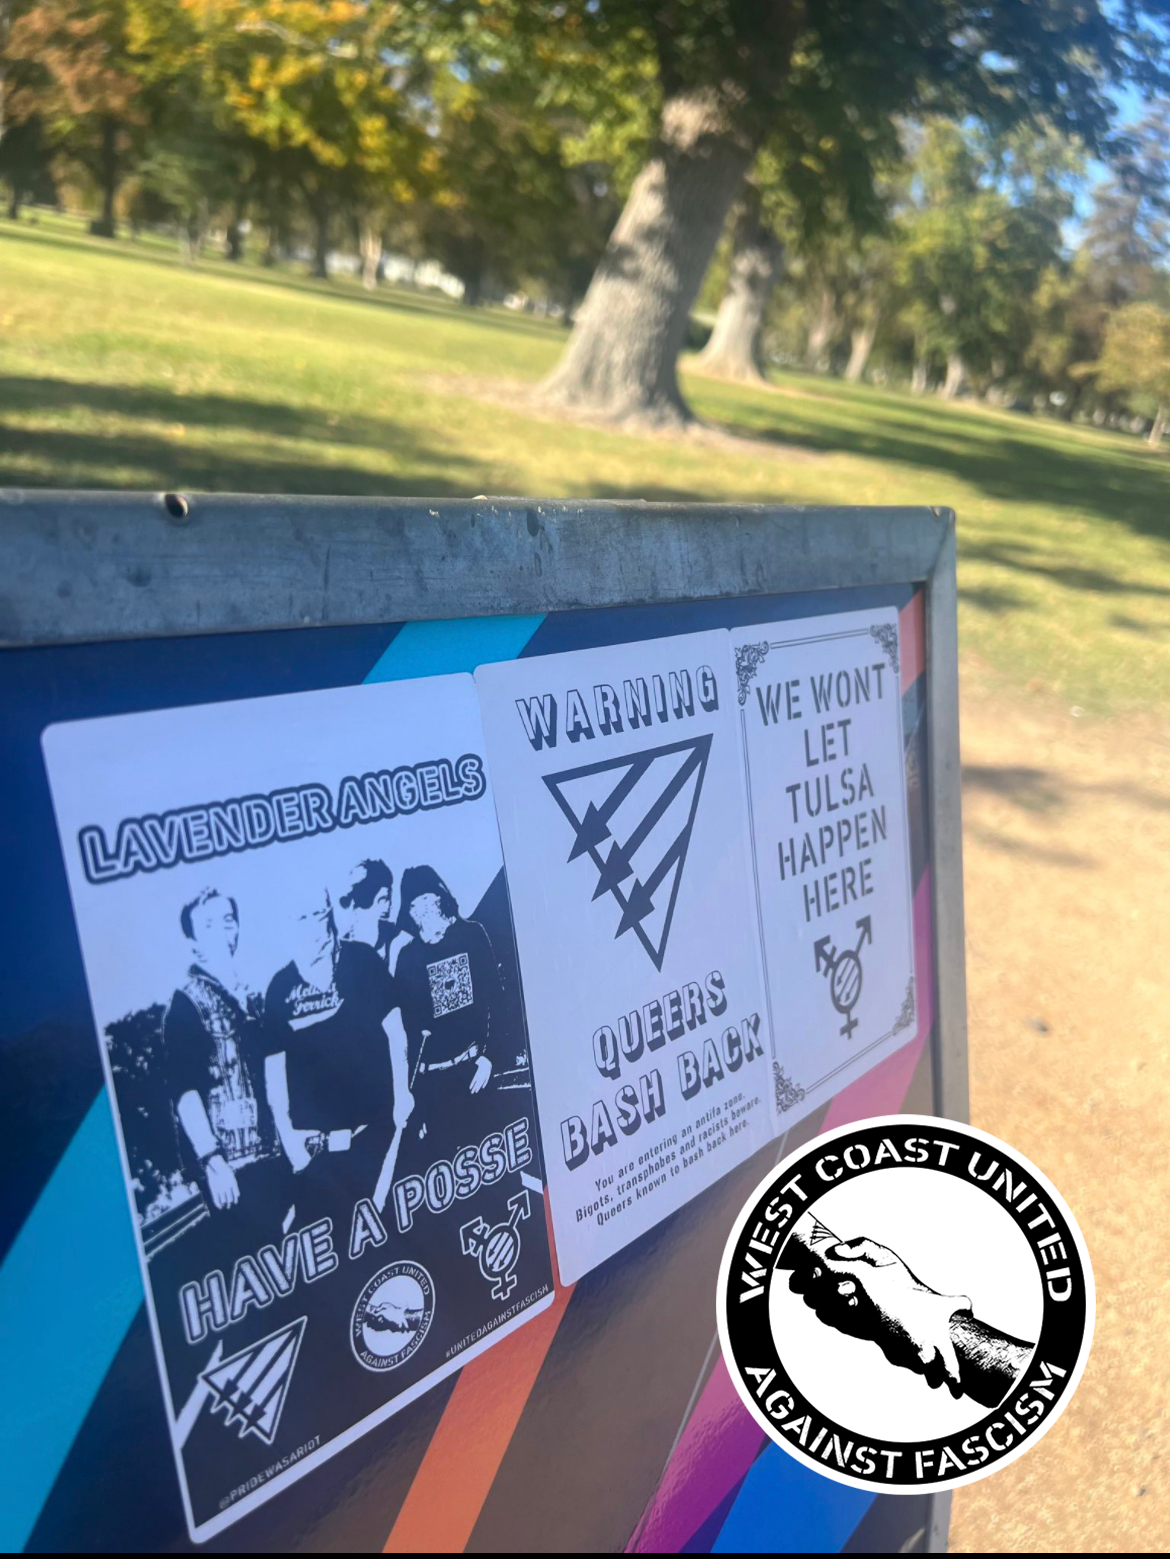 What appears to be the corner of a bus stop with a field of grass and trees behind it has three flyers adheared to the corner. From left to right, the first flyer reads "Lavender Angels Have A Posse." The image has a group of people standing, one carrying a bat. The bottom of it has the symbols for the Queer Front, WCUAF, and the Trans Front. The second flyer reads "Warning, Queers Bash Back." with the Queer Front symbol. The third reads "We wont let Tulsa happen here." with a Trans Front symbol across it.